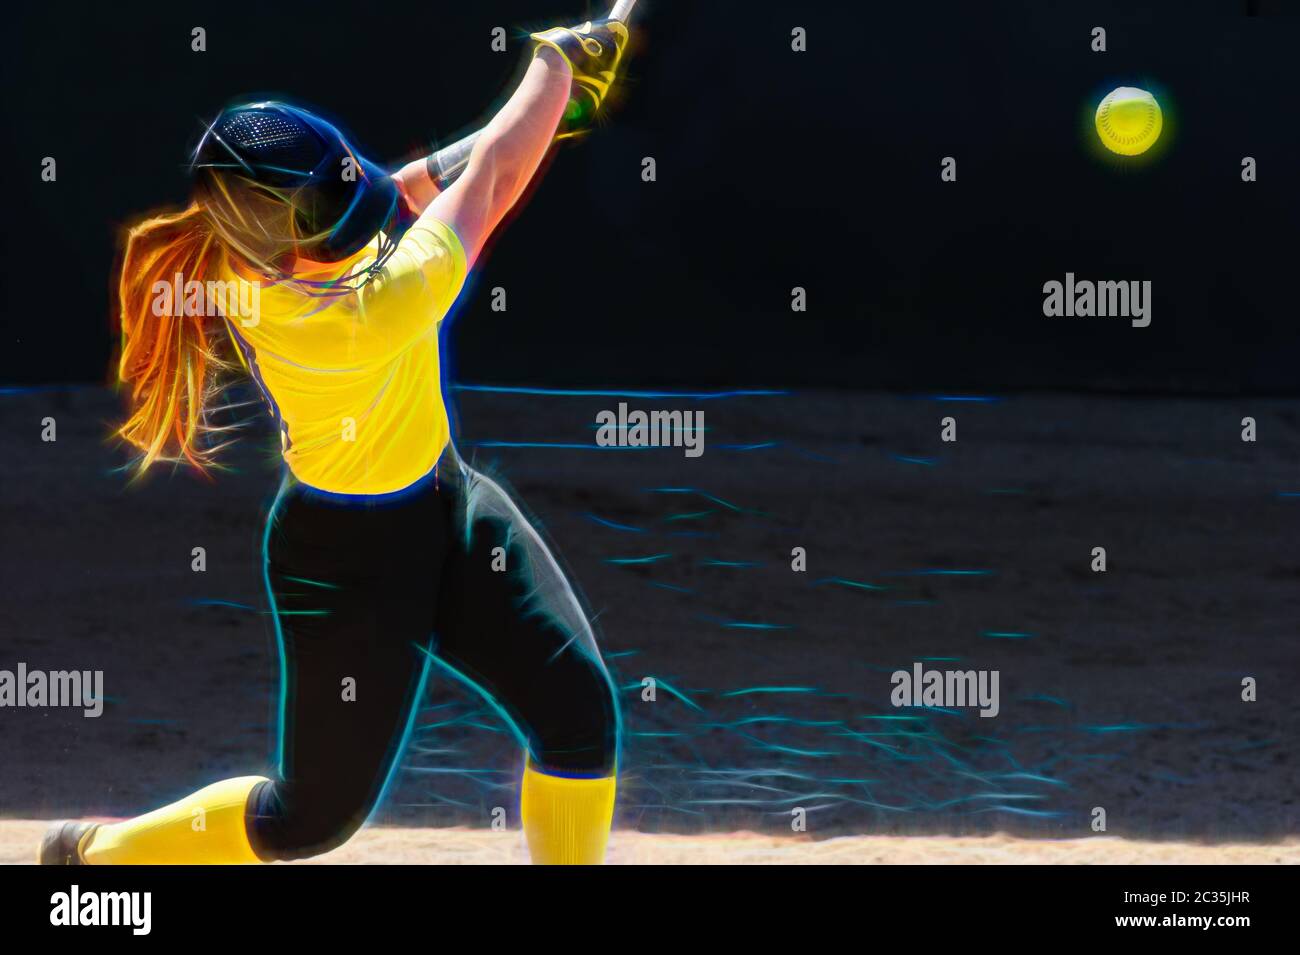 A Female Baseball Player is Batting Swinging at the Pitch Stock Photo